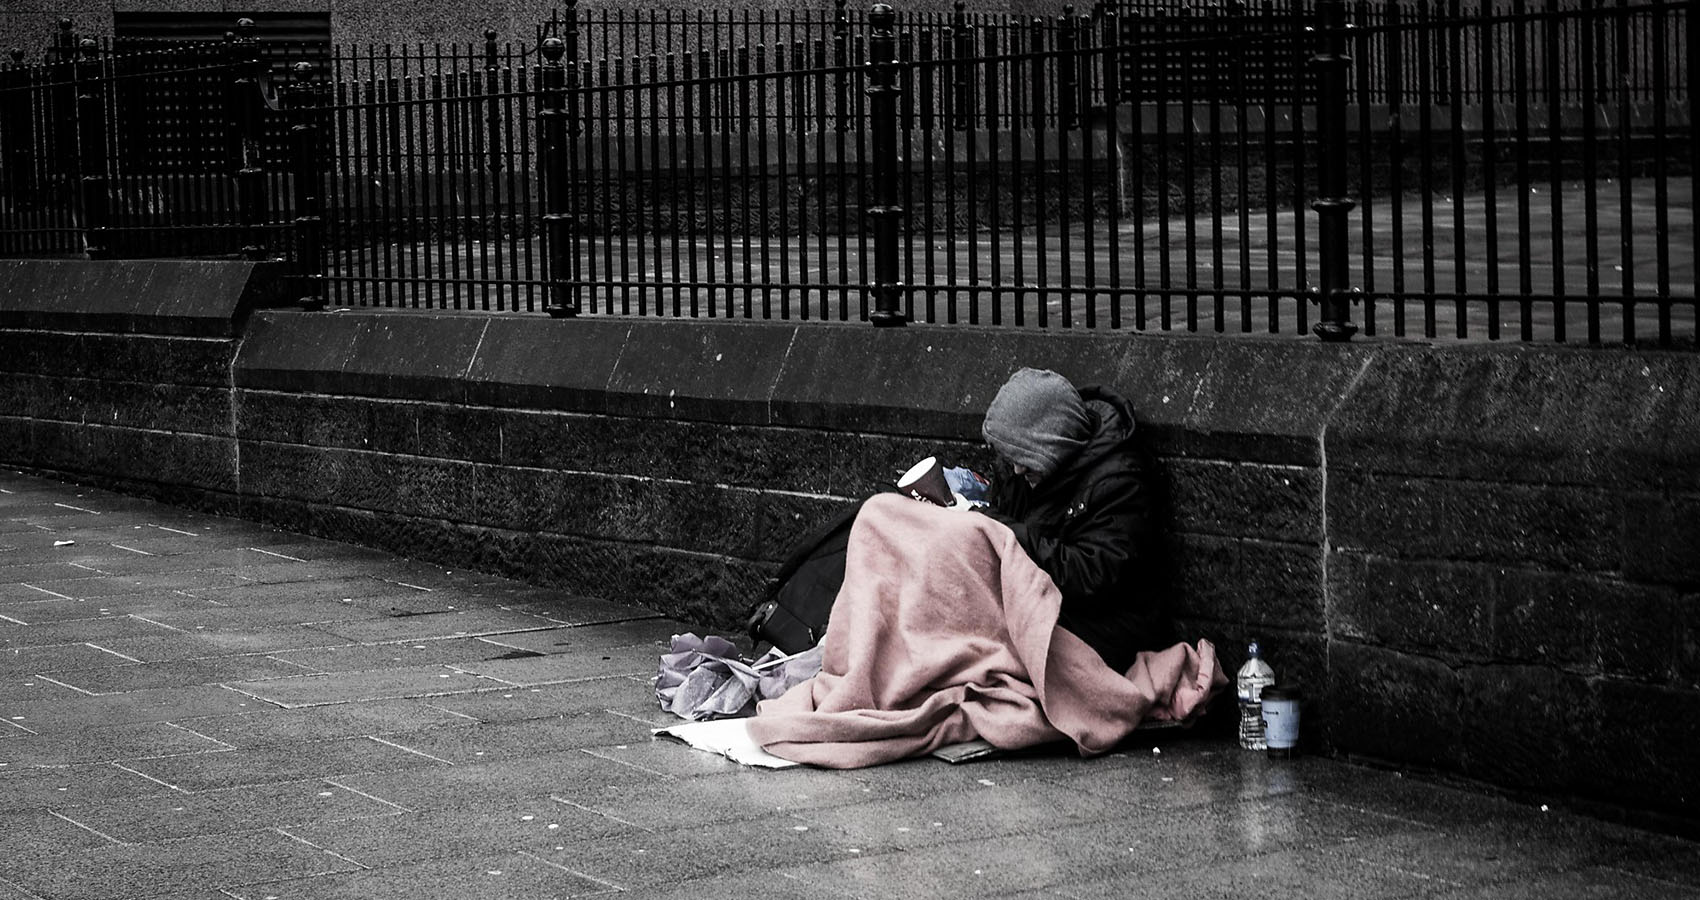 urban legends that turned out to be true - street photography beggar - Ere We Lietu 29 Econd